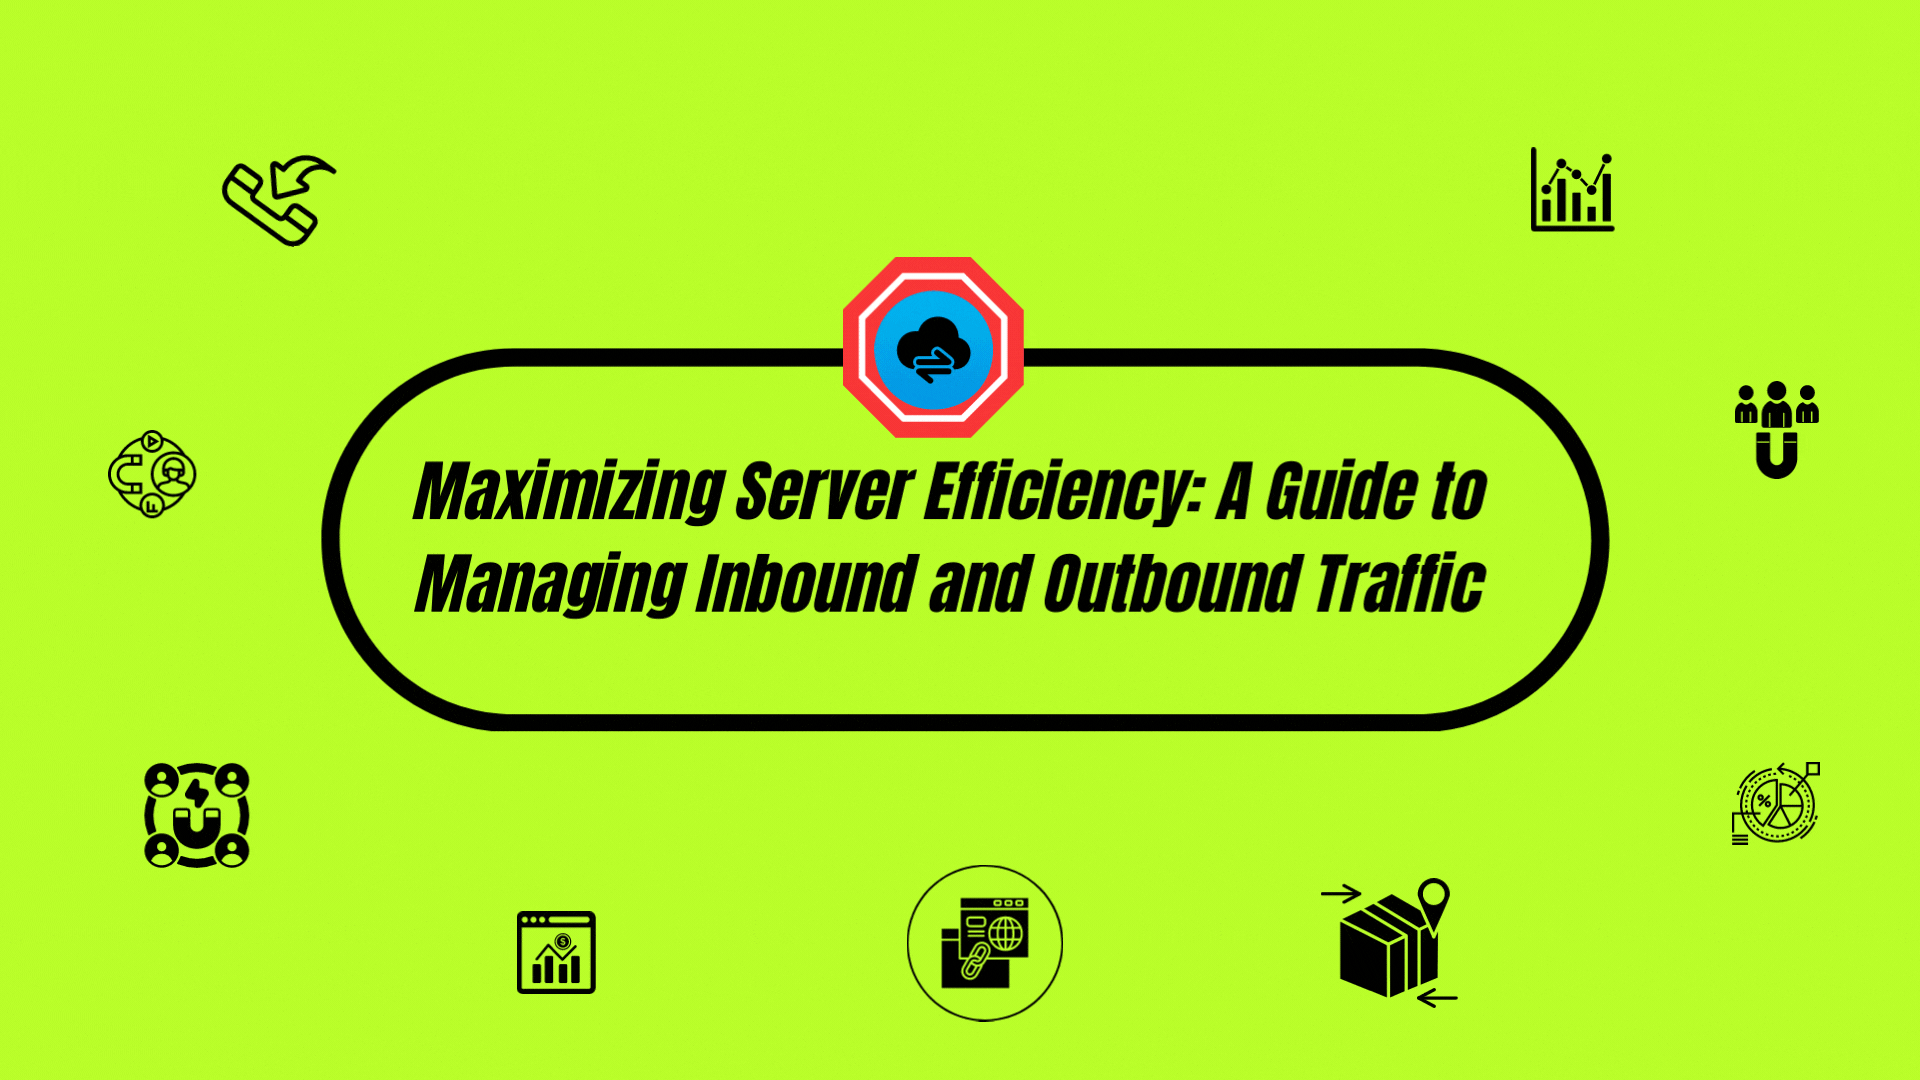 Add aMaximizing Server Efficiency A Guide to Managing Inbound and Outbound Traffic heading